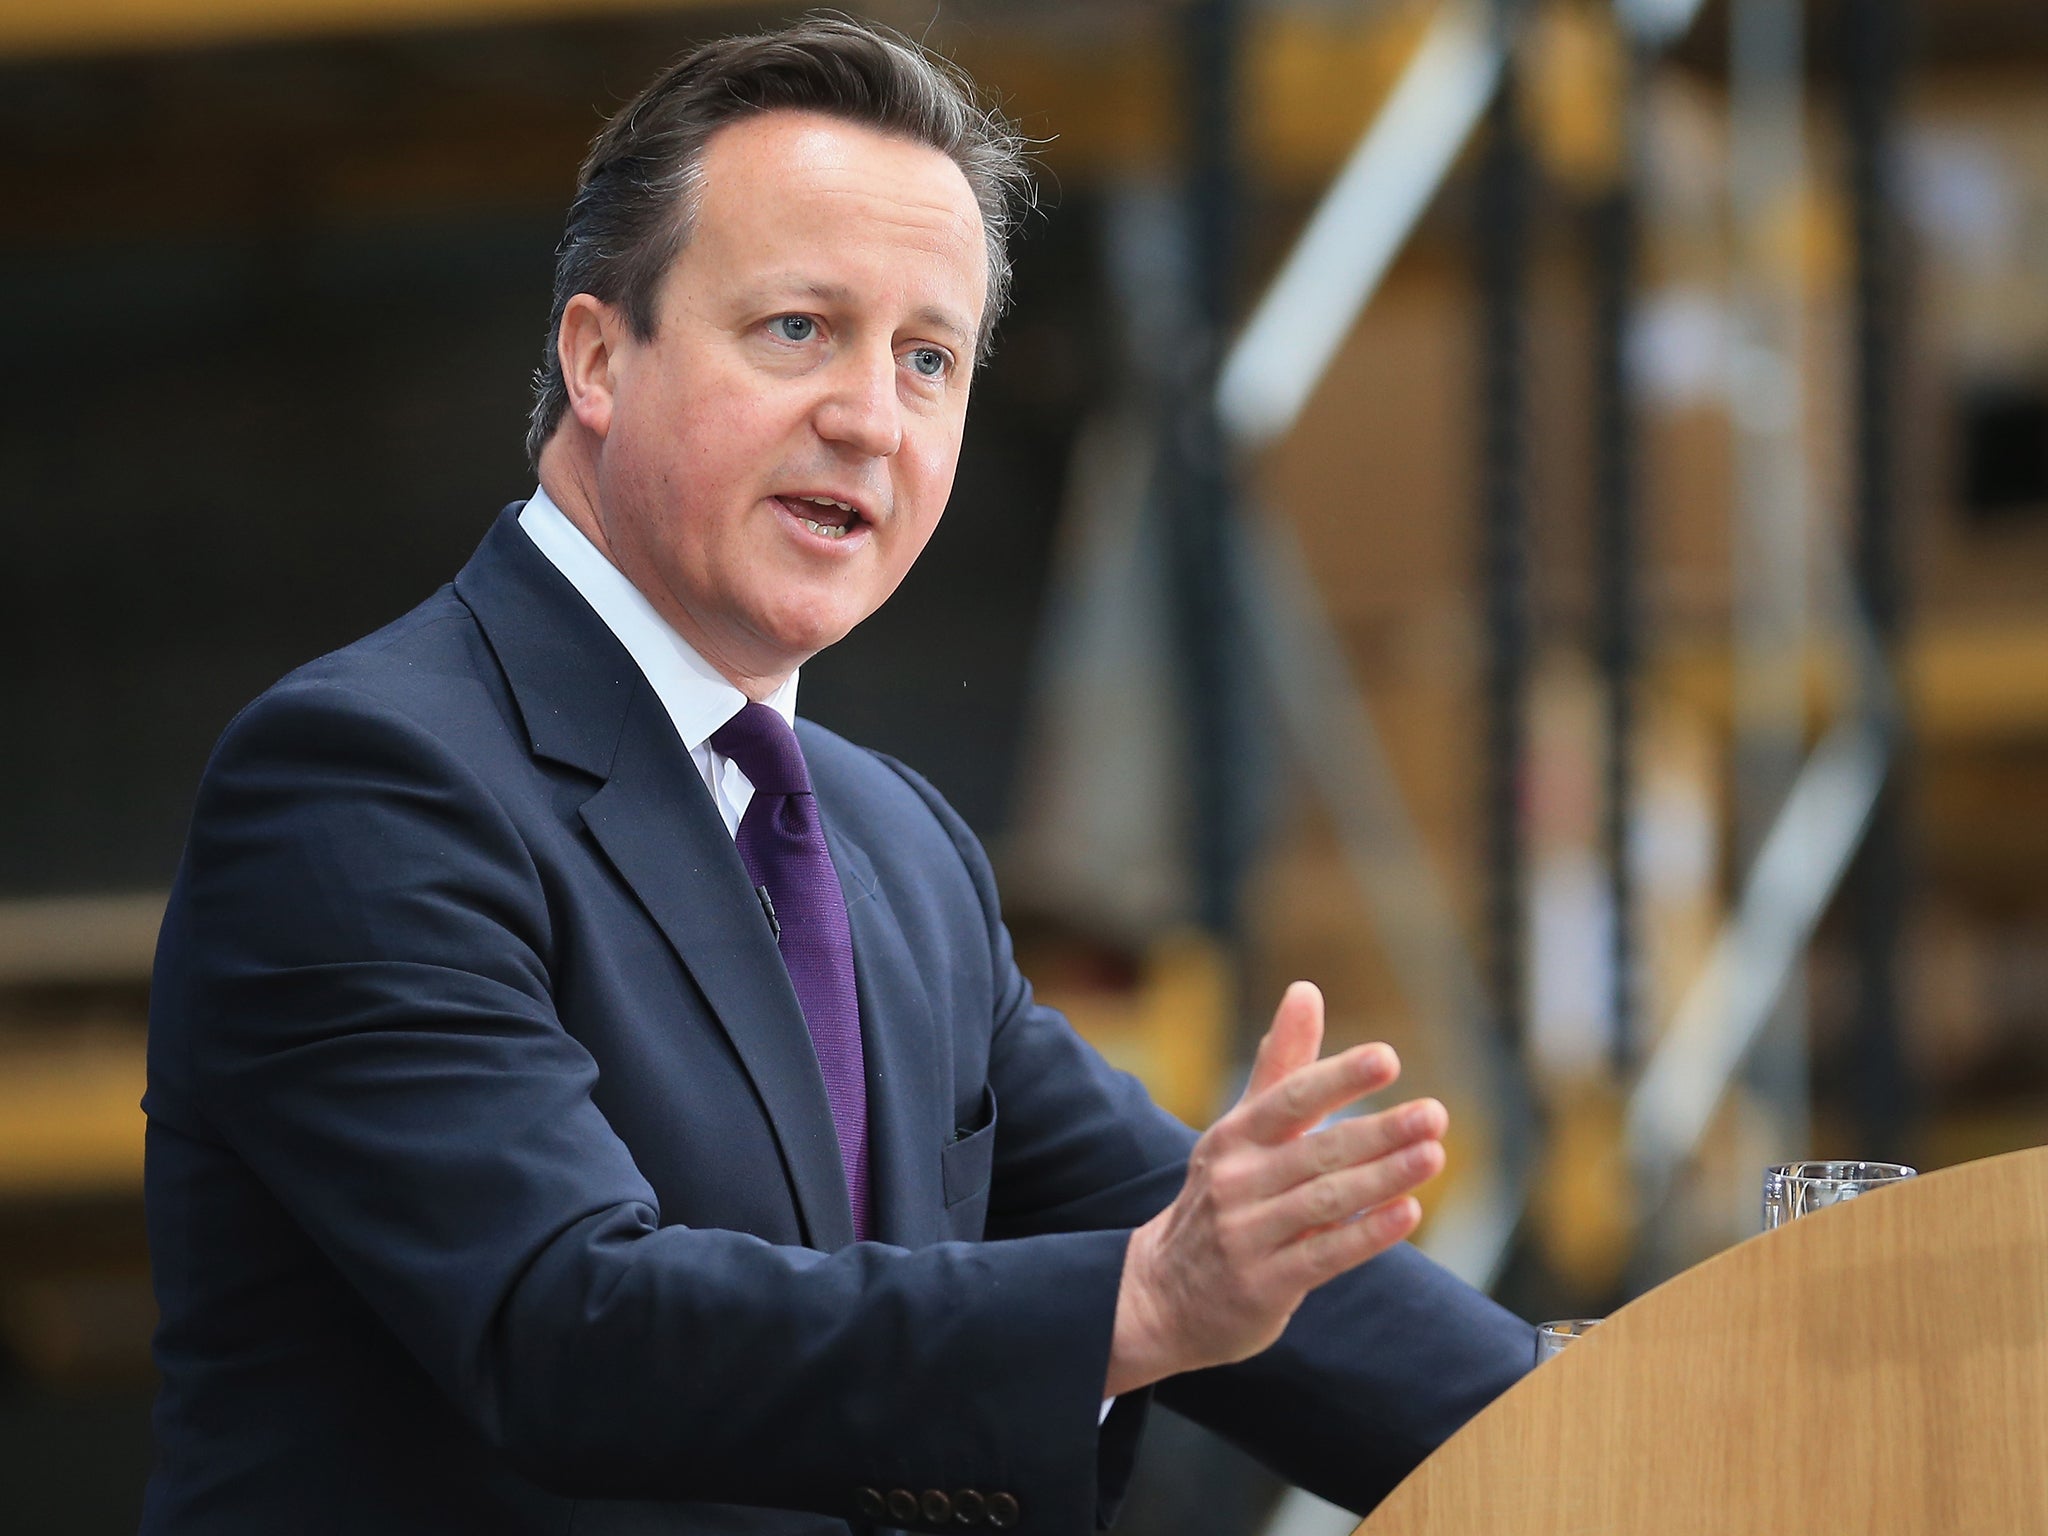 David Cameron says he felt a “moral duty” to cut taxes after next year’s general election